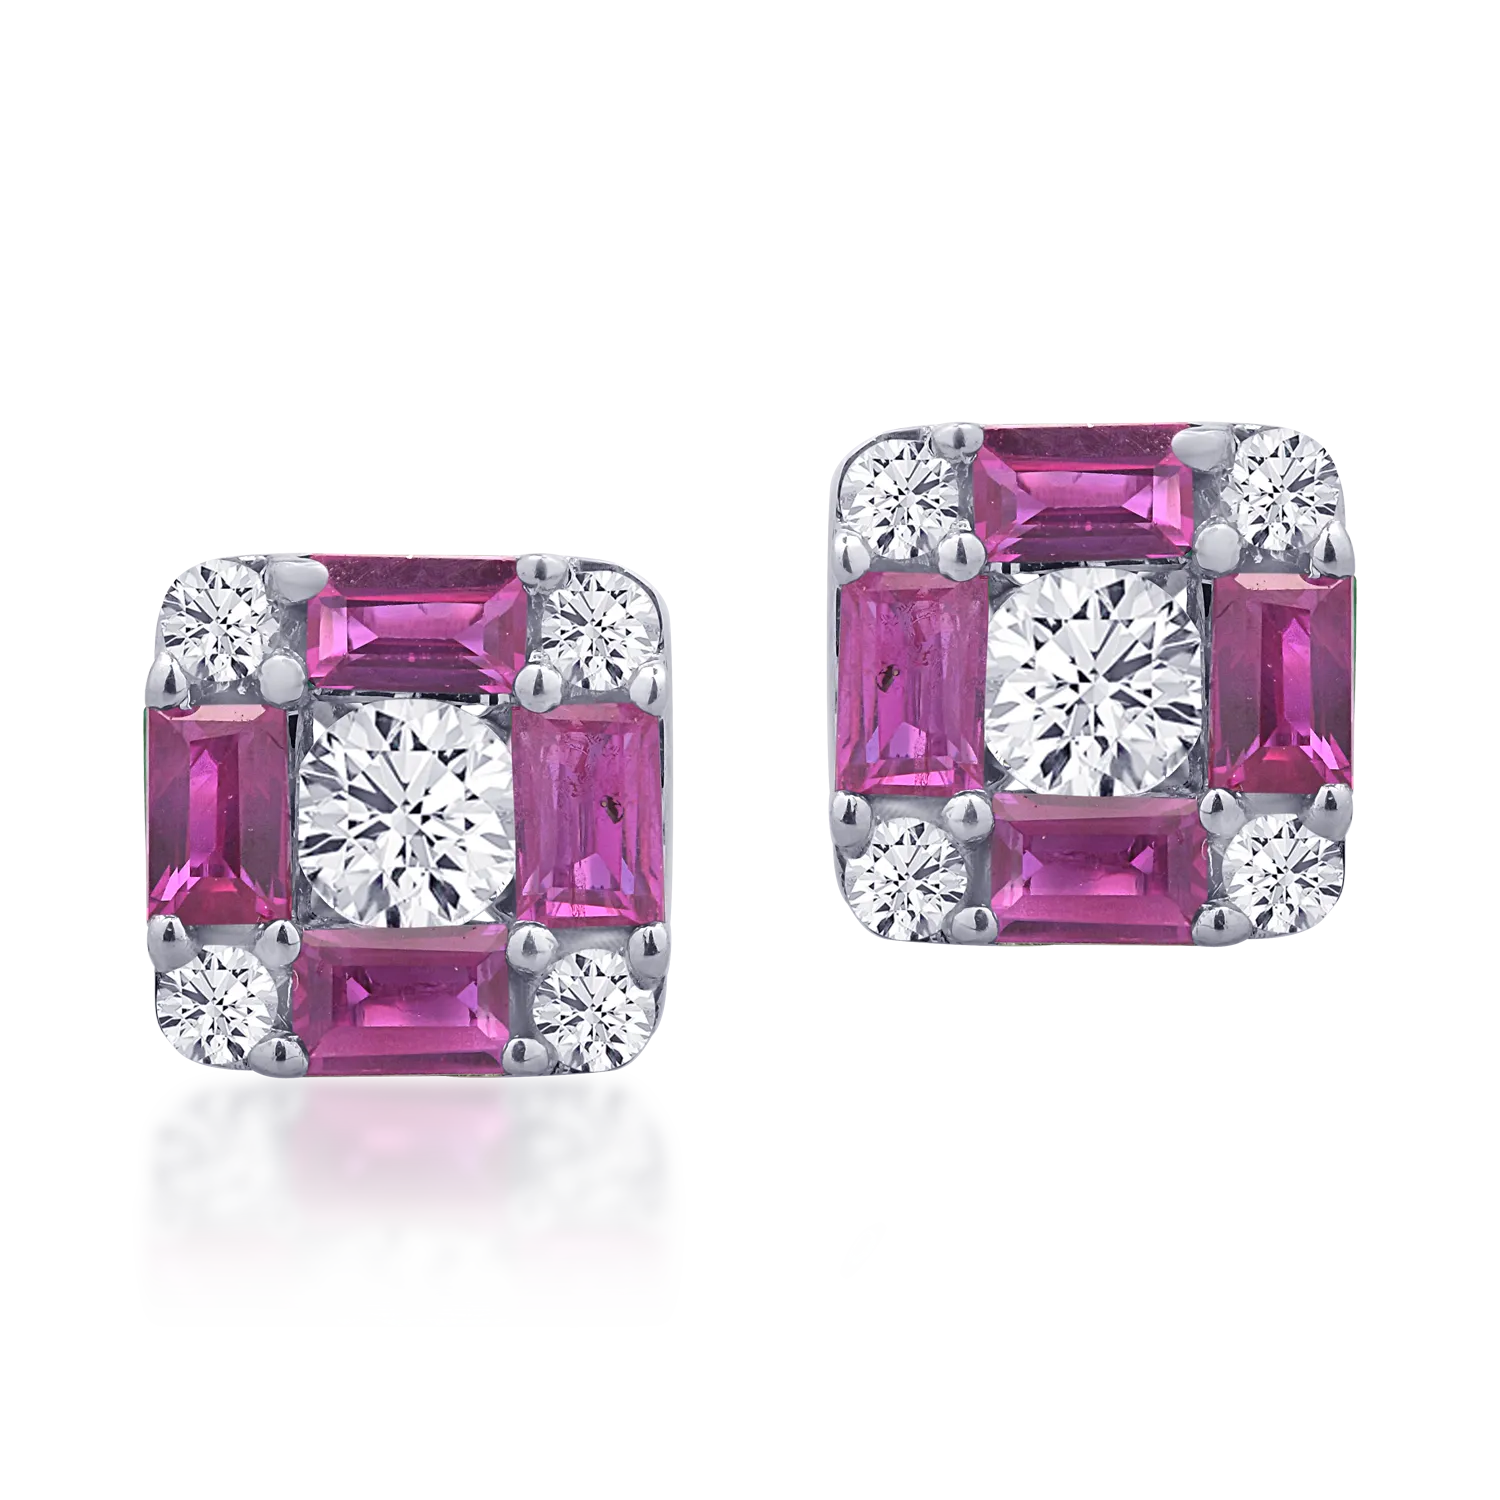 18K white gold earrings with 0.94ct rubies and 0.38ct diamonds